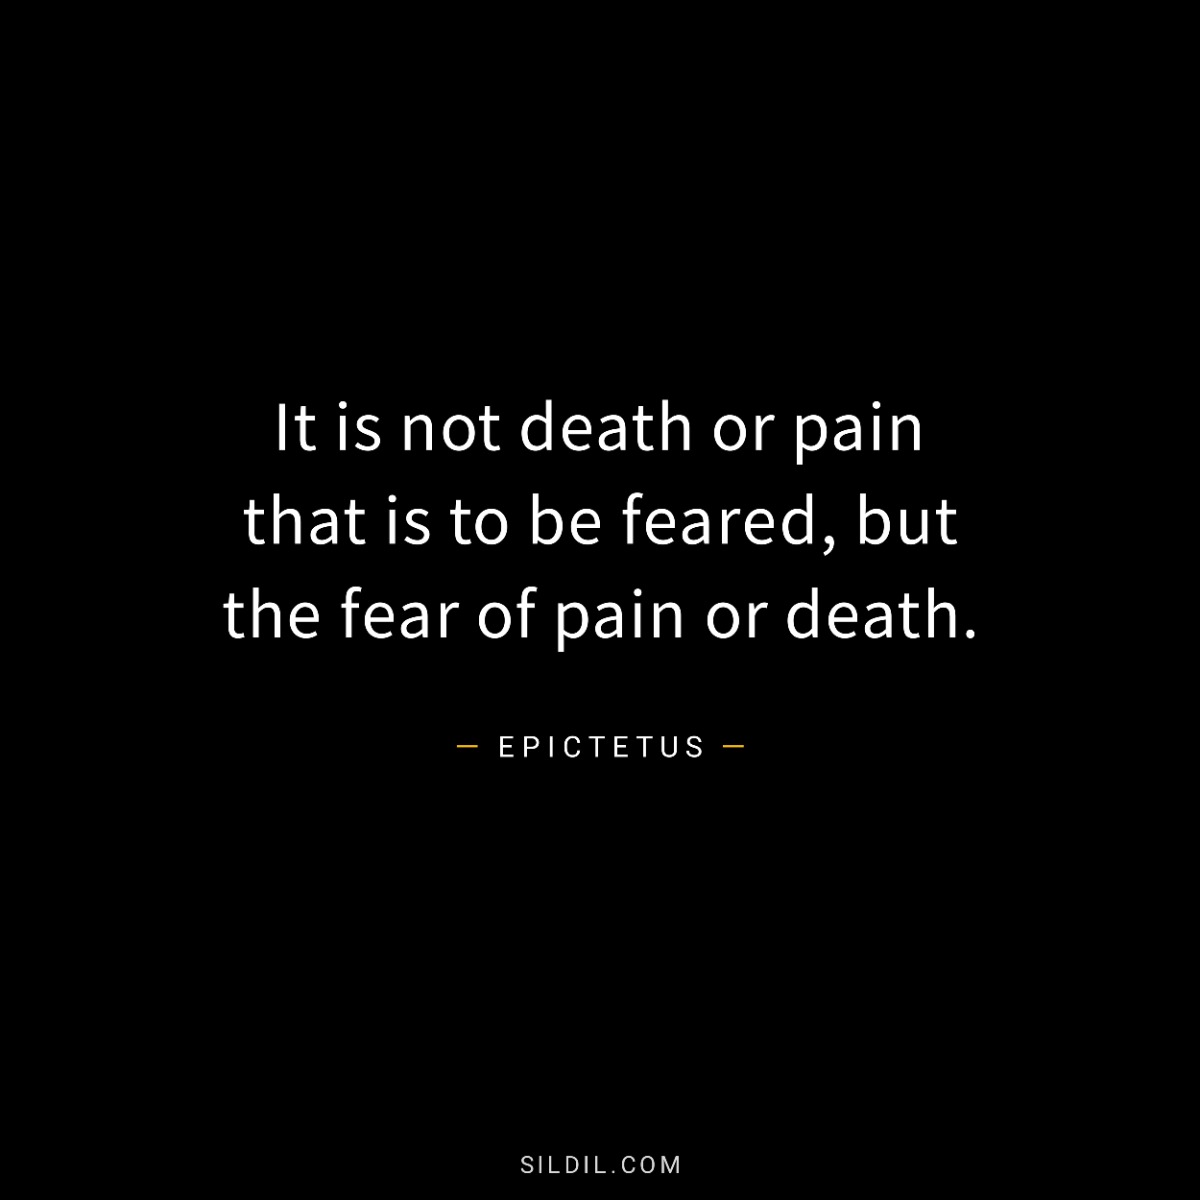 It is not death or pain that is to be feared, but the fear of pain or death.